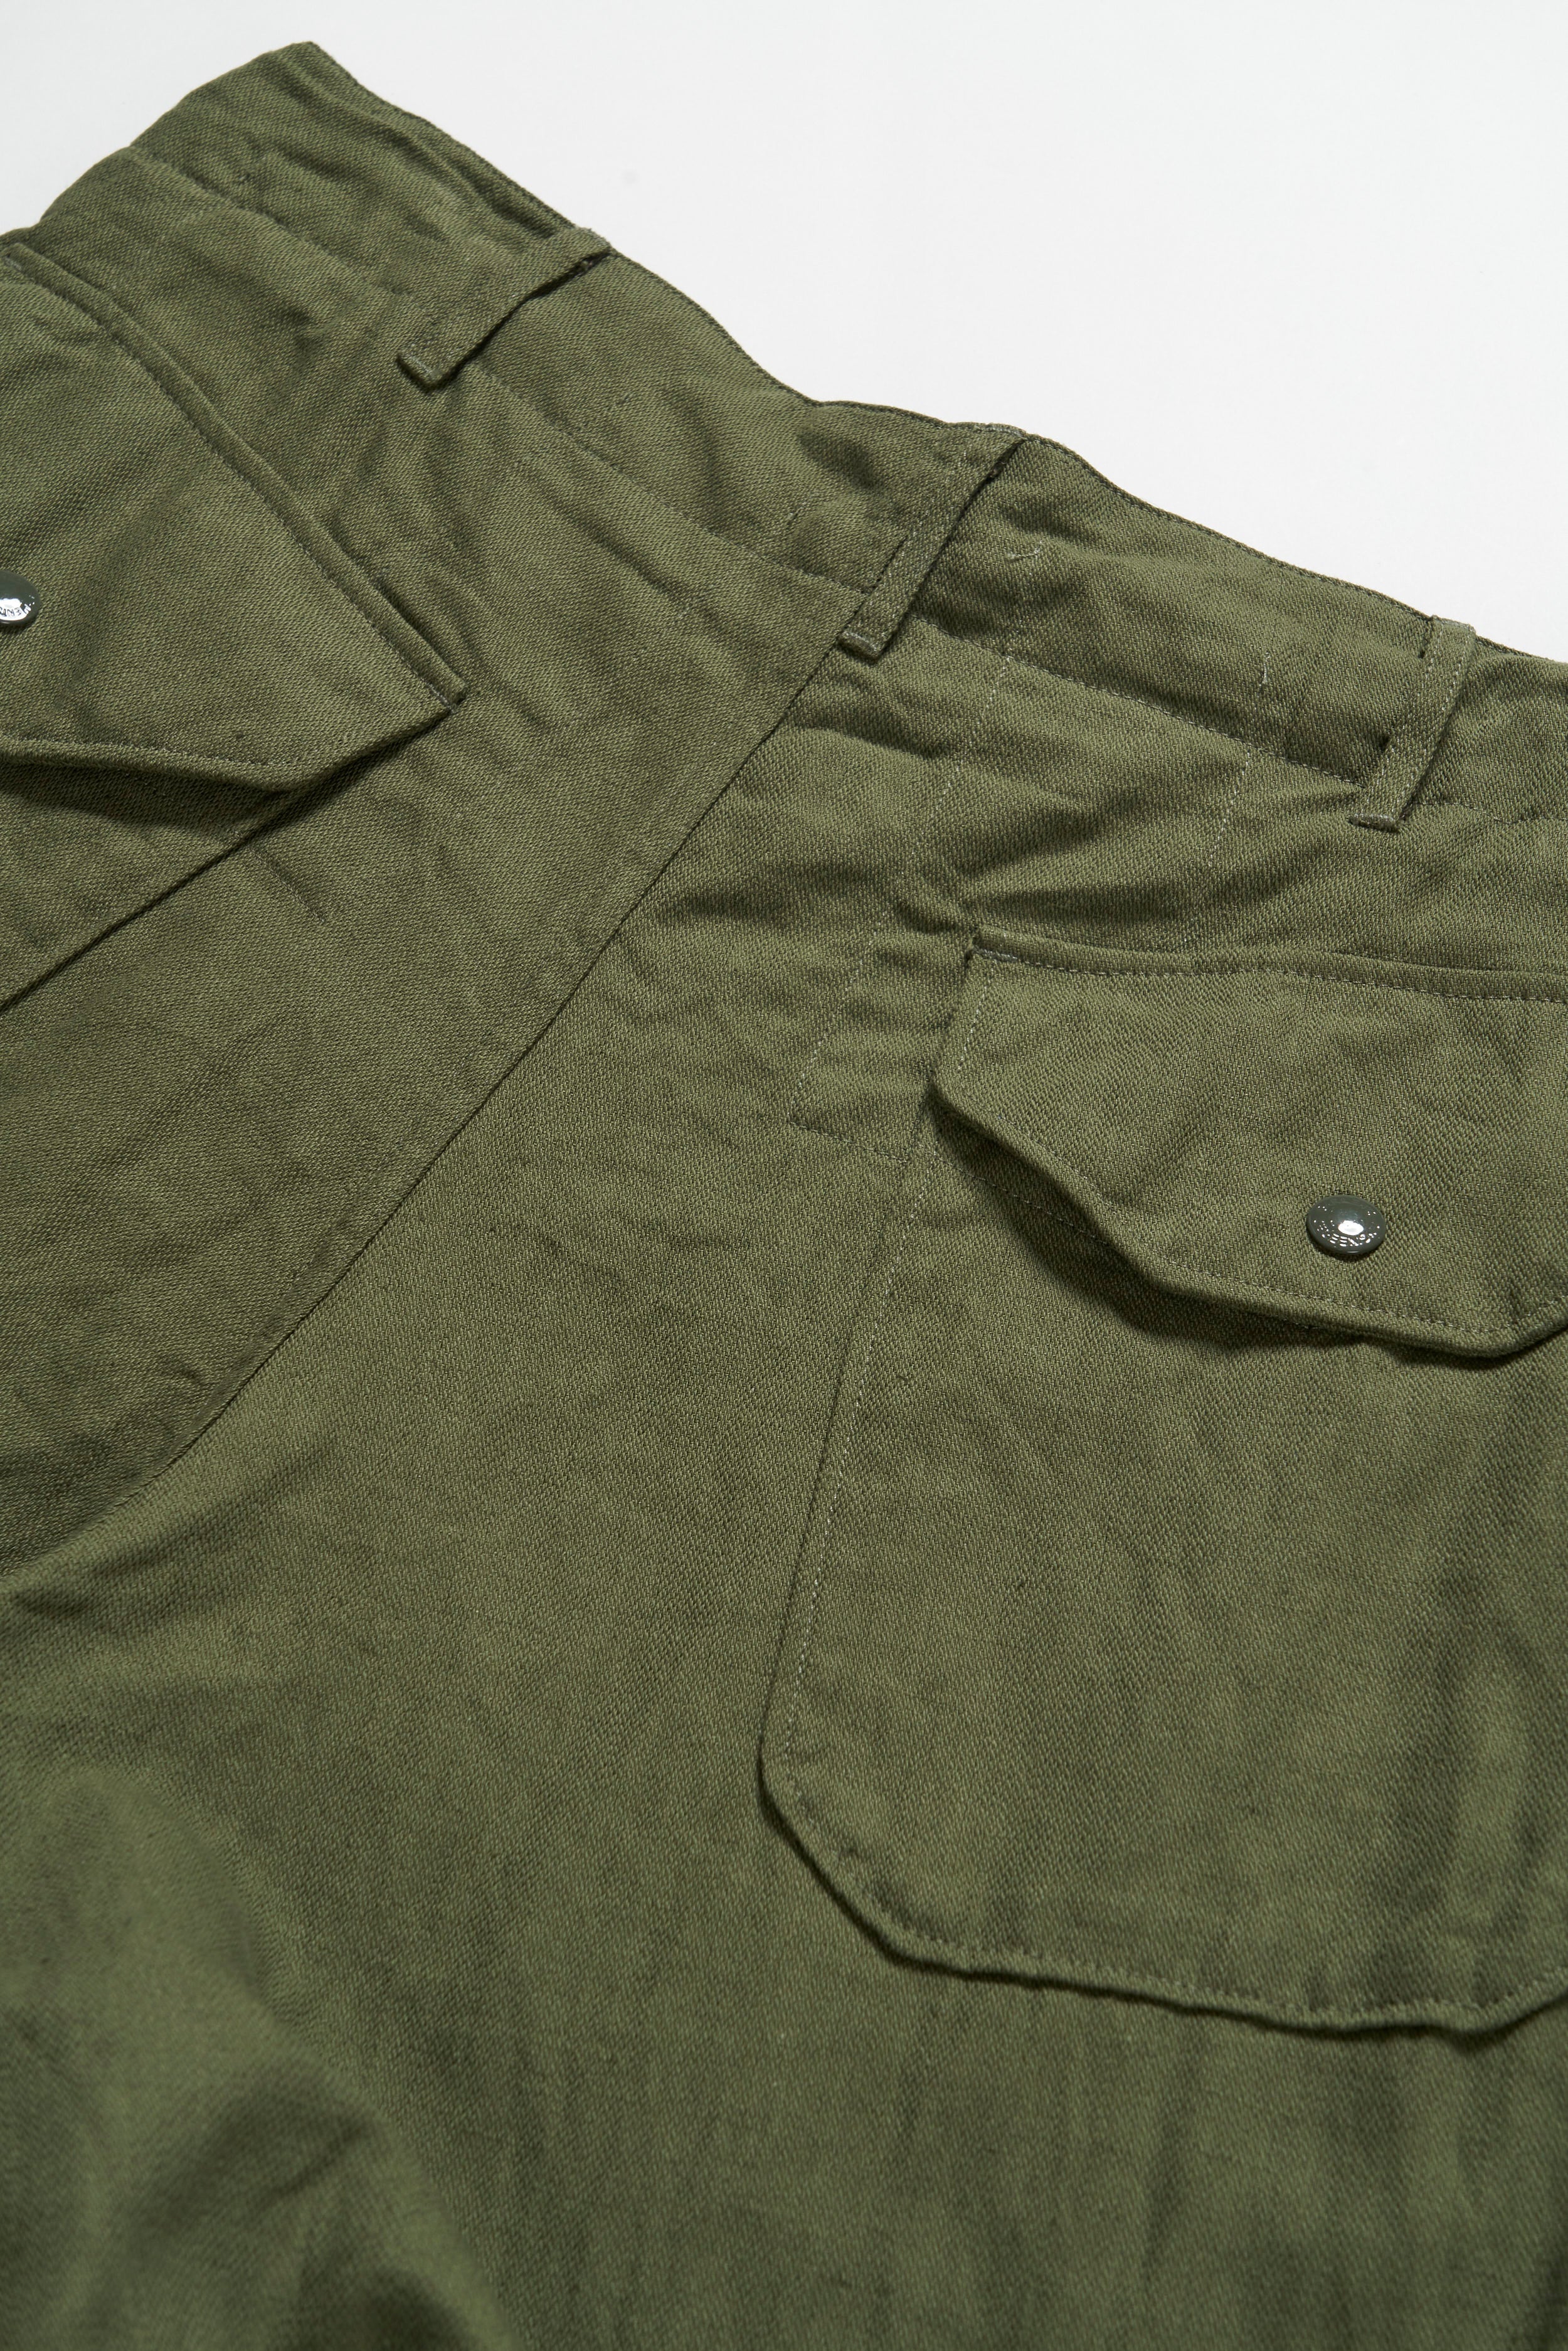 Engineered Garments Over Pant - Olive Cotton Acetate Satin